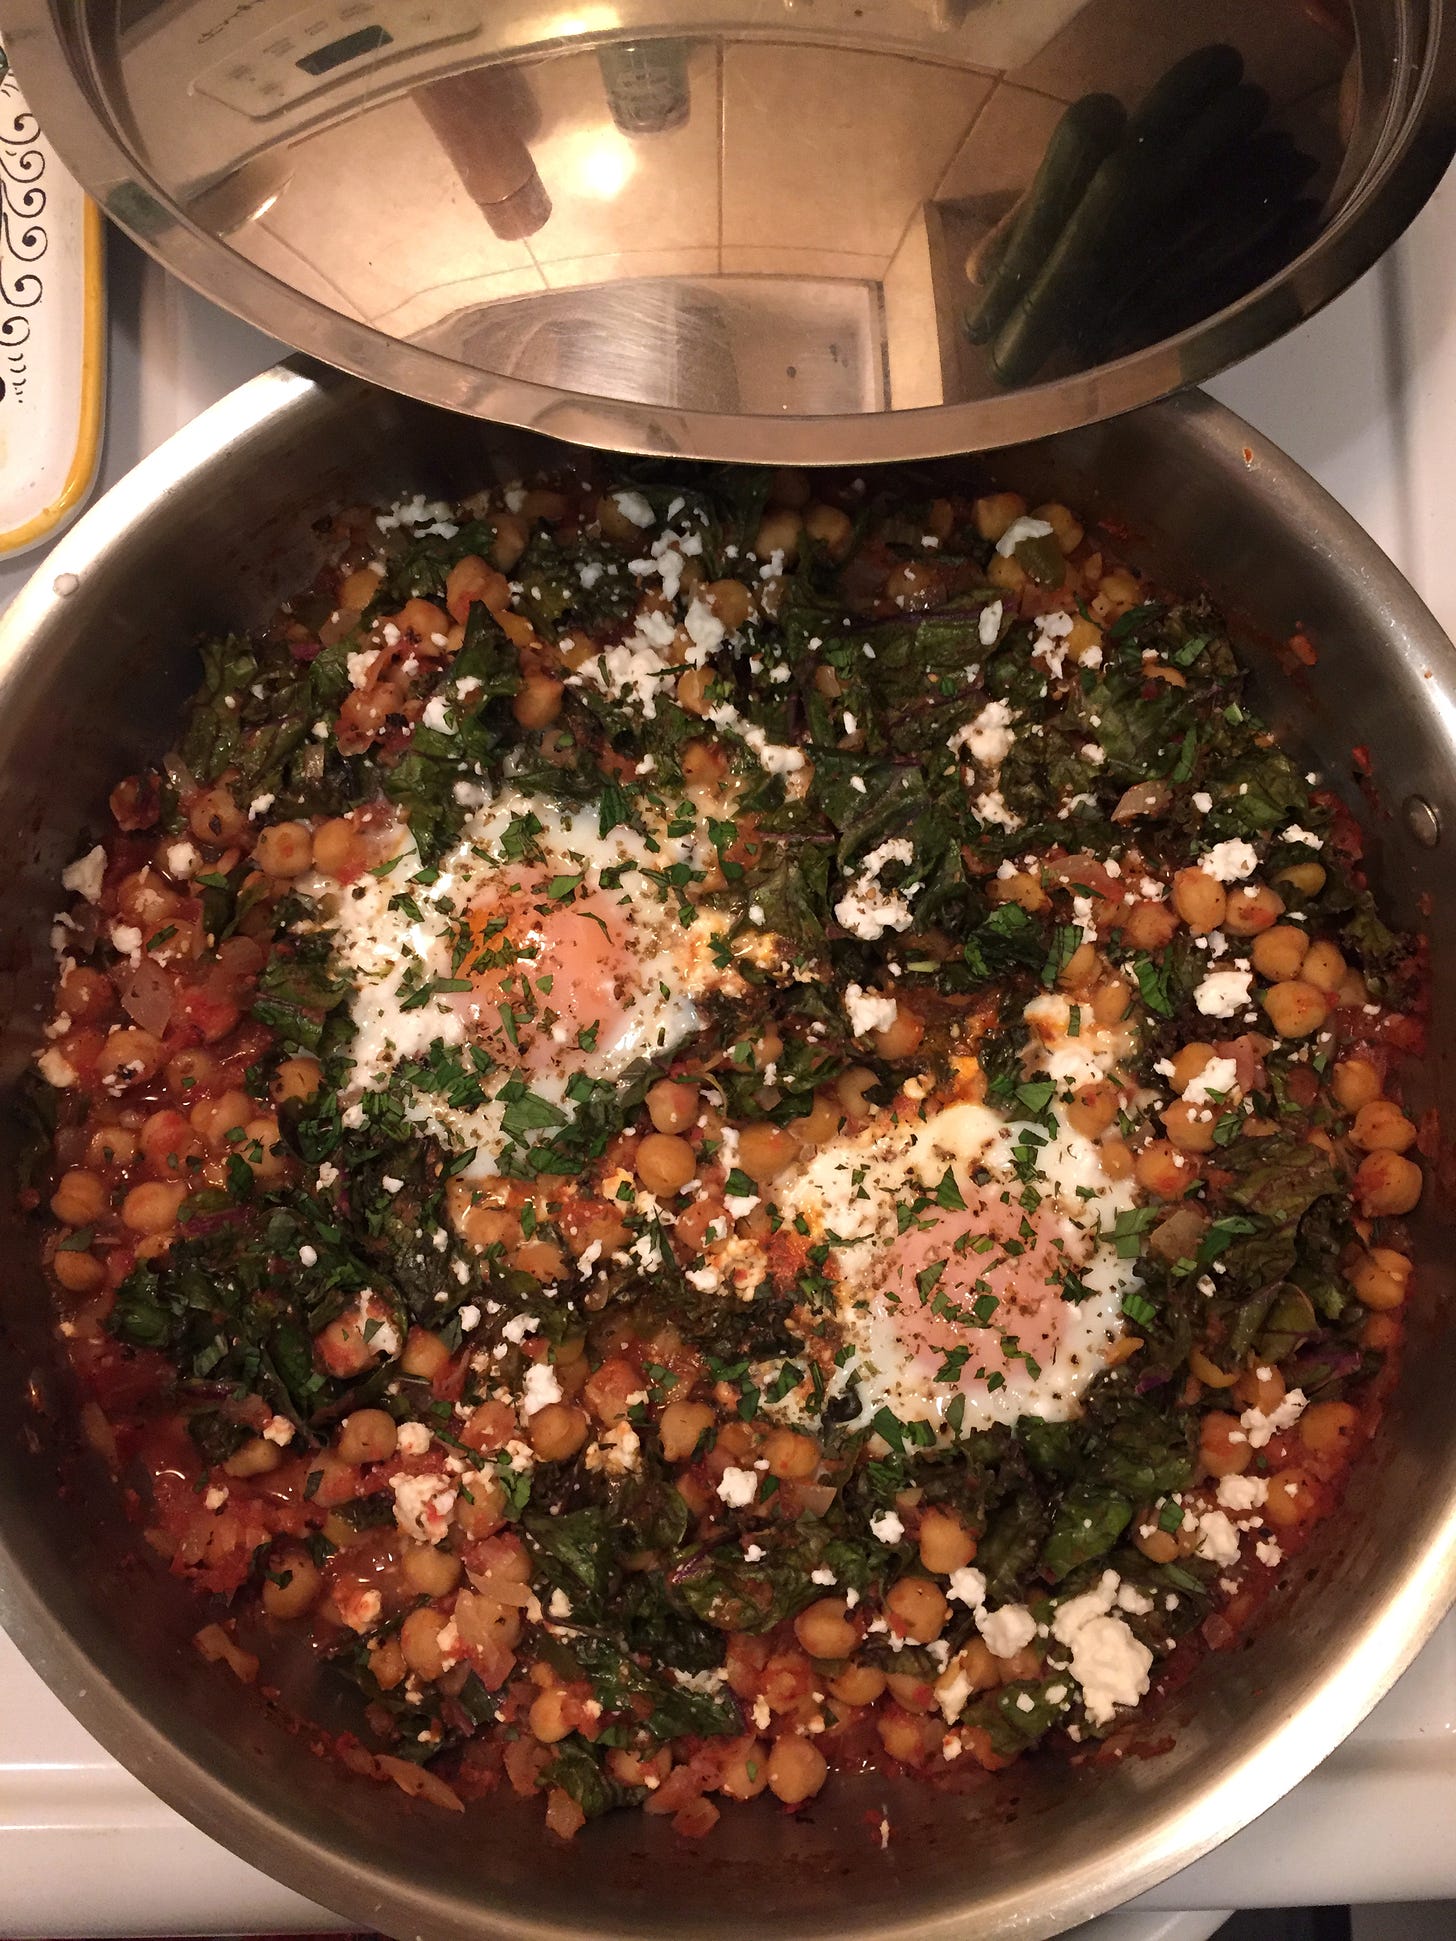 A large stainless steel pan full of the chickpea and kale shakshuka, with two poached eggs in the centre. The top is scattered with feta, mint, oregano, and za'atar.